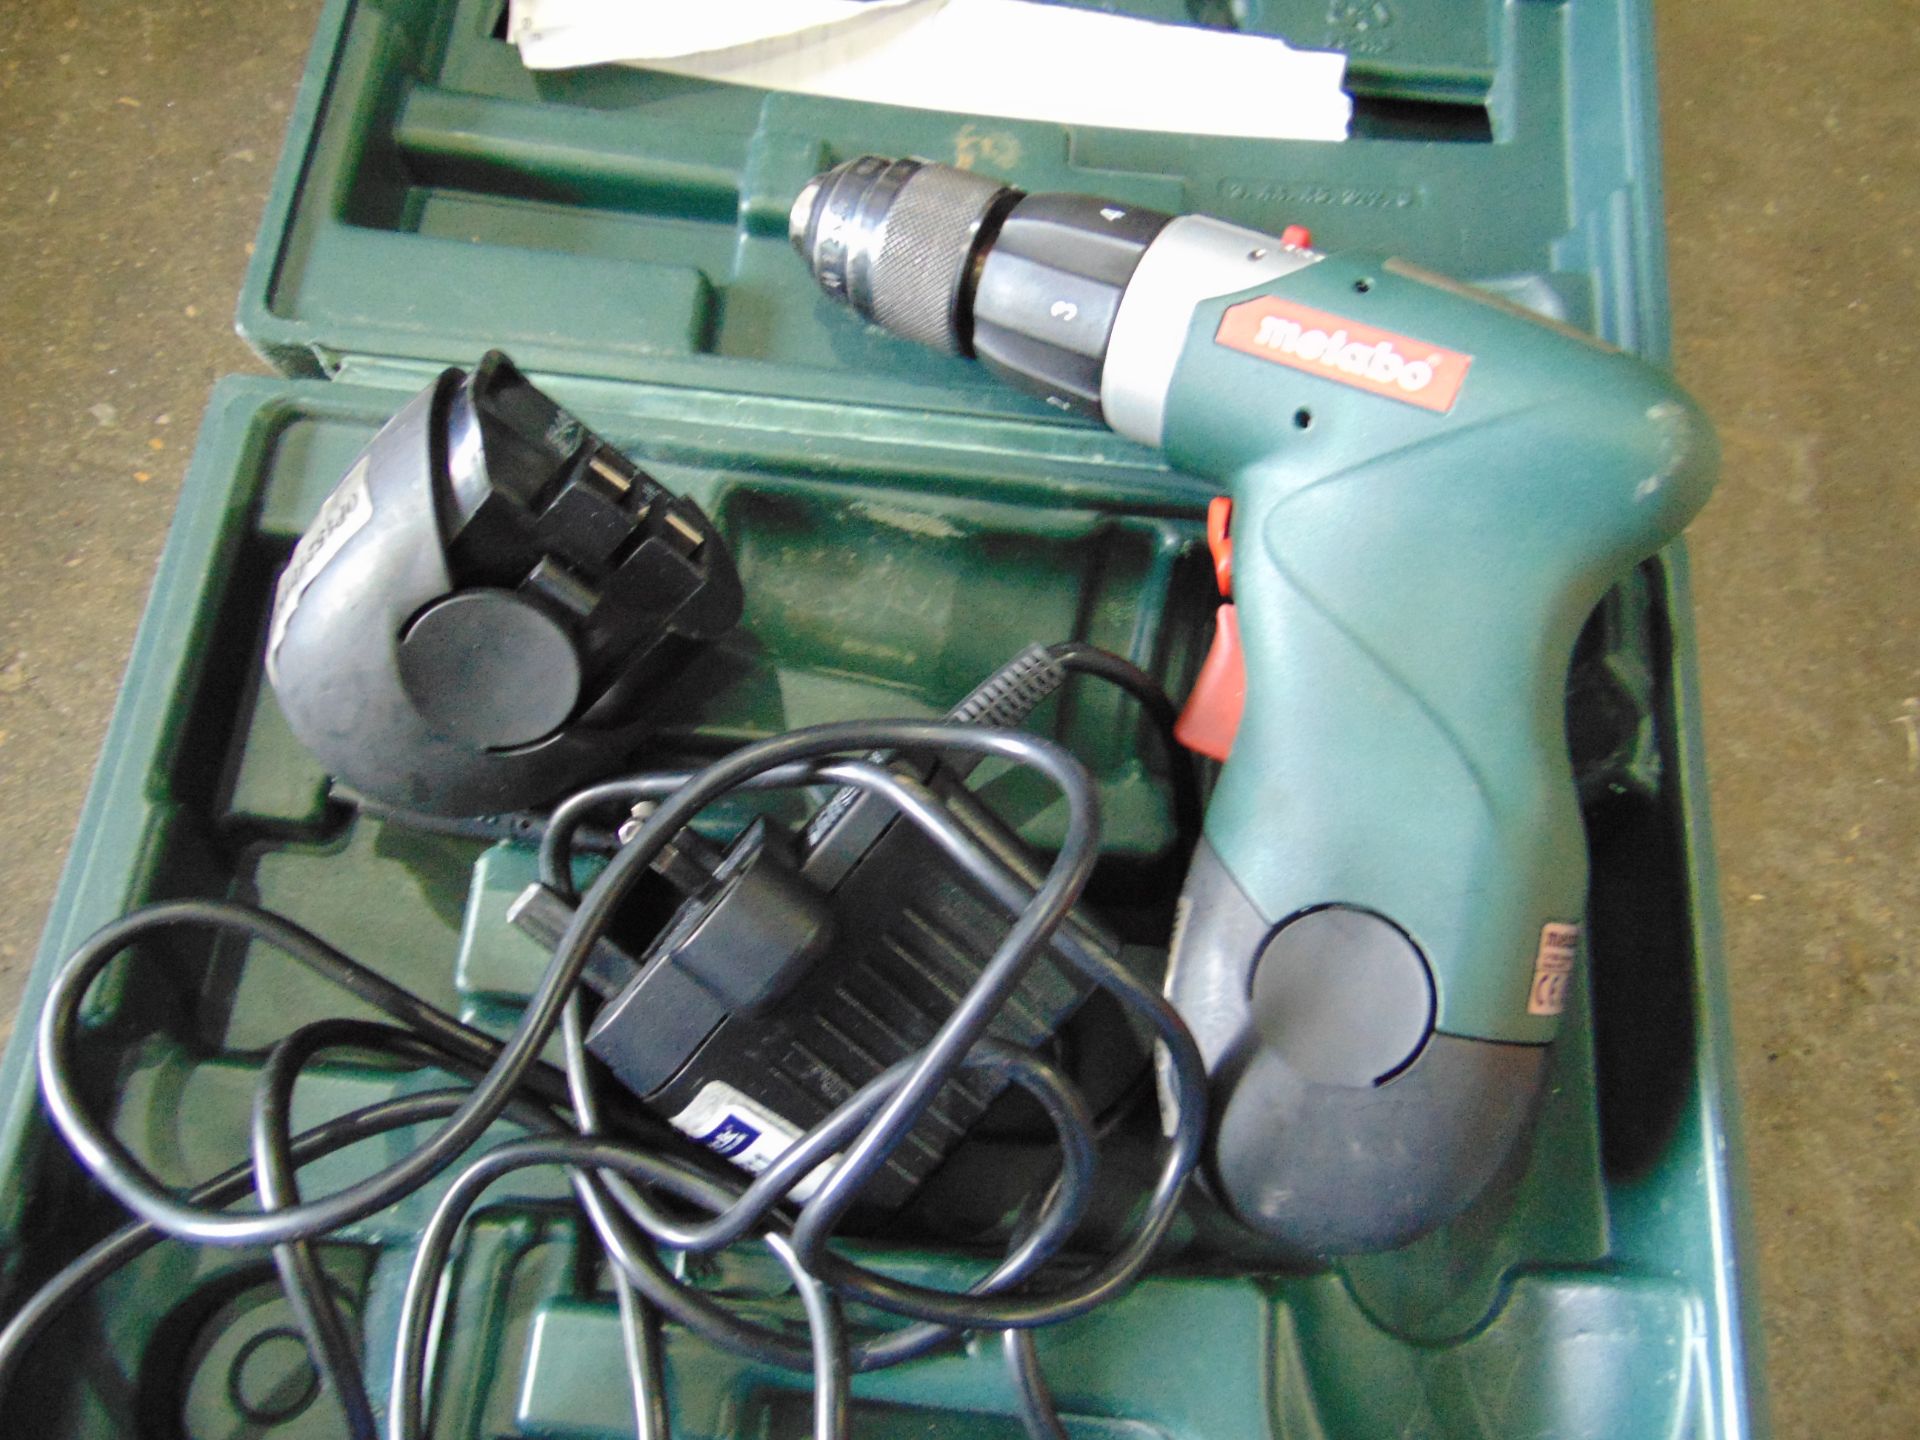 Metabo Powermaxx 4.8V Cordless Screwdriver C/W 2 x Batteries / Charger & Case - Image 2 of 6